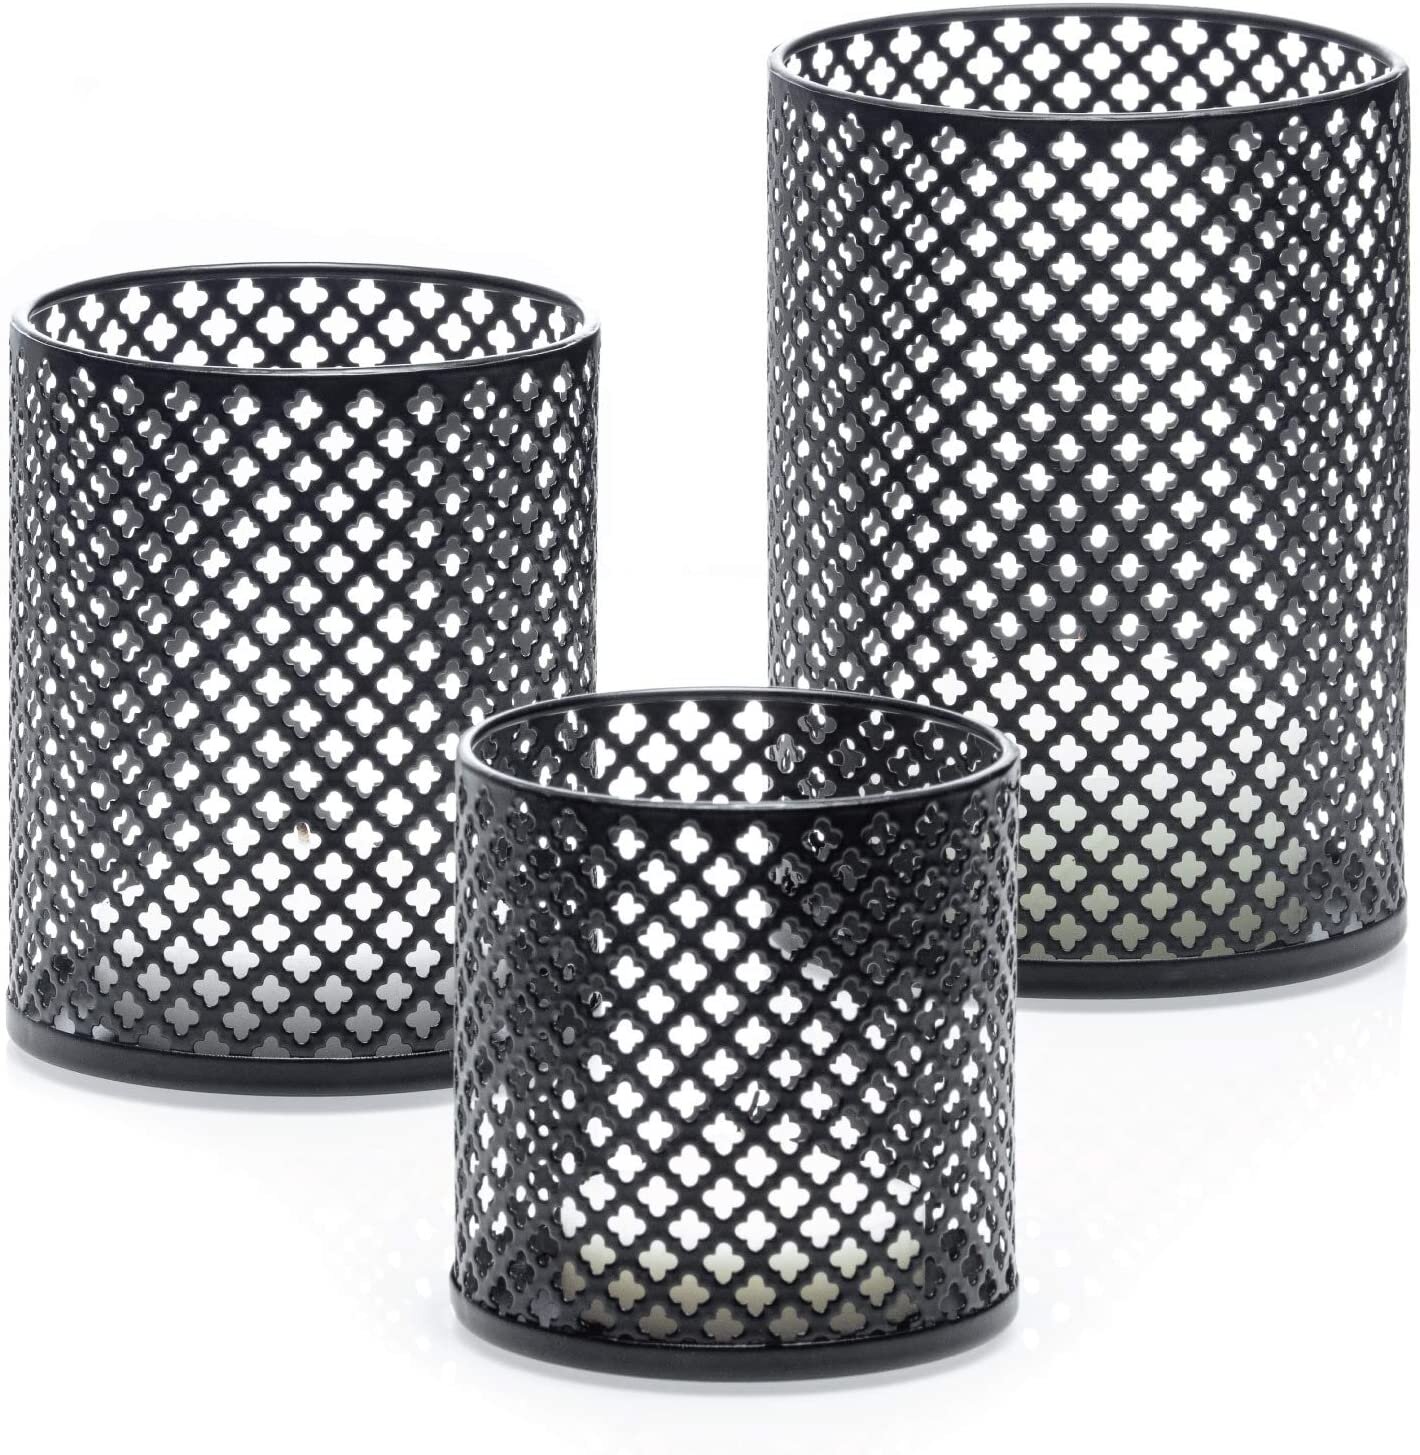 Moroccan style pillar candle holders with punched metal quatrefoils